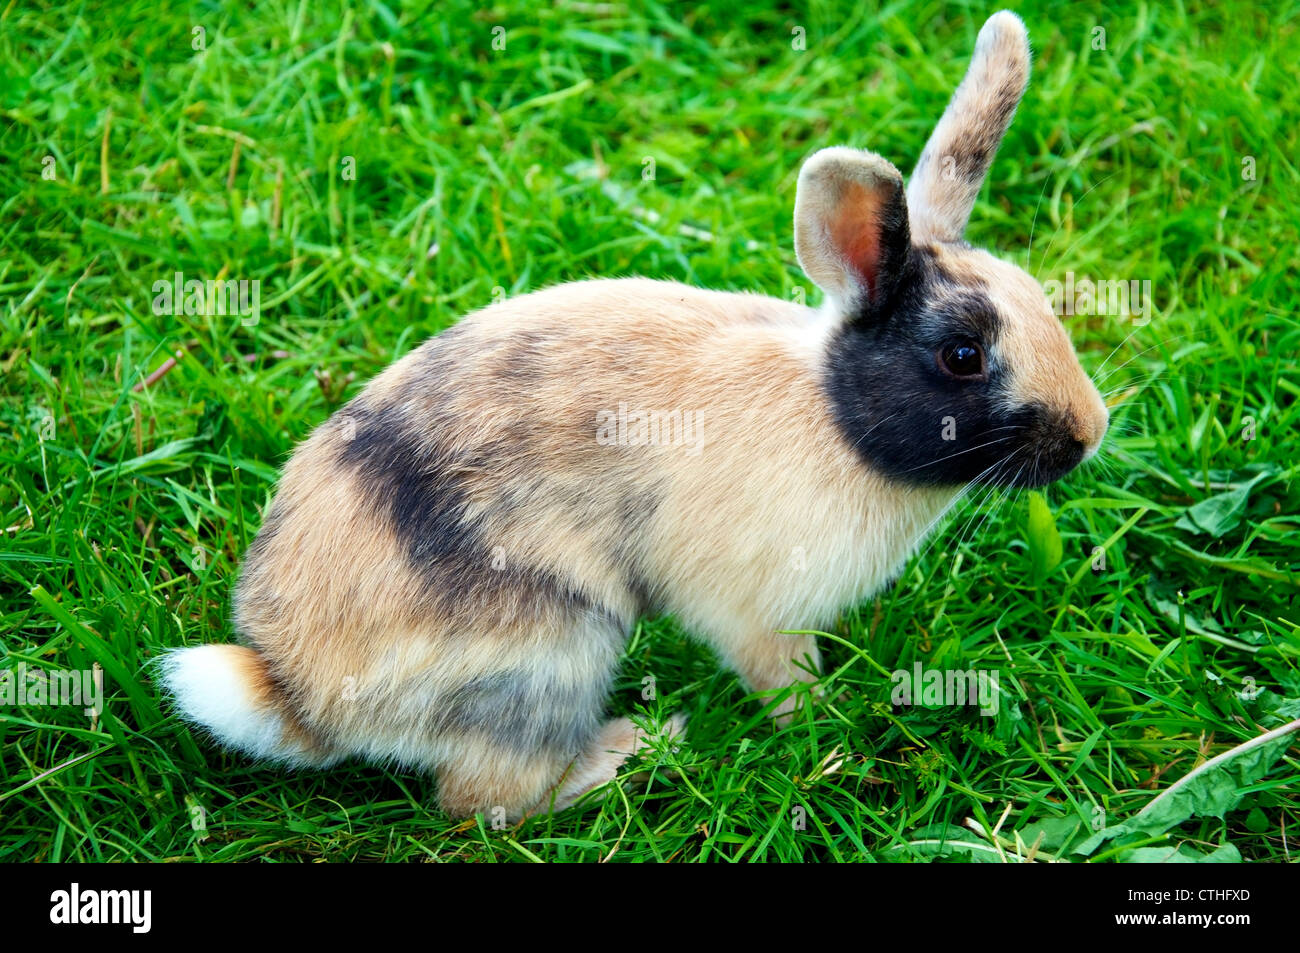 Cute little bunny (lapin) on Green grass Banque D'Images